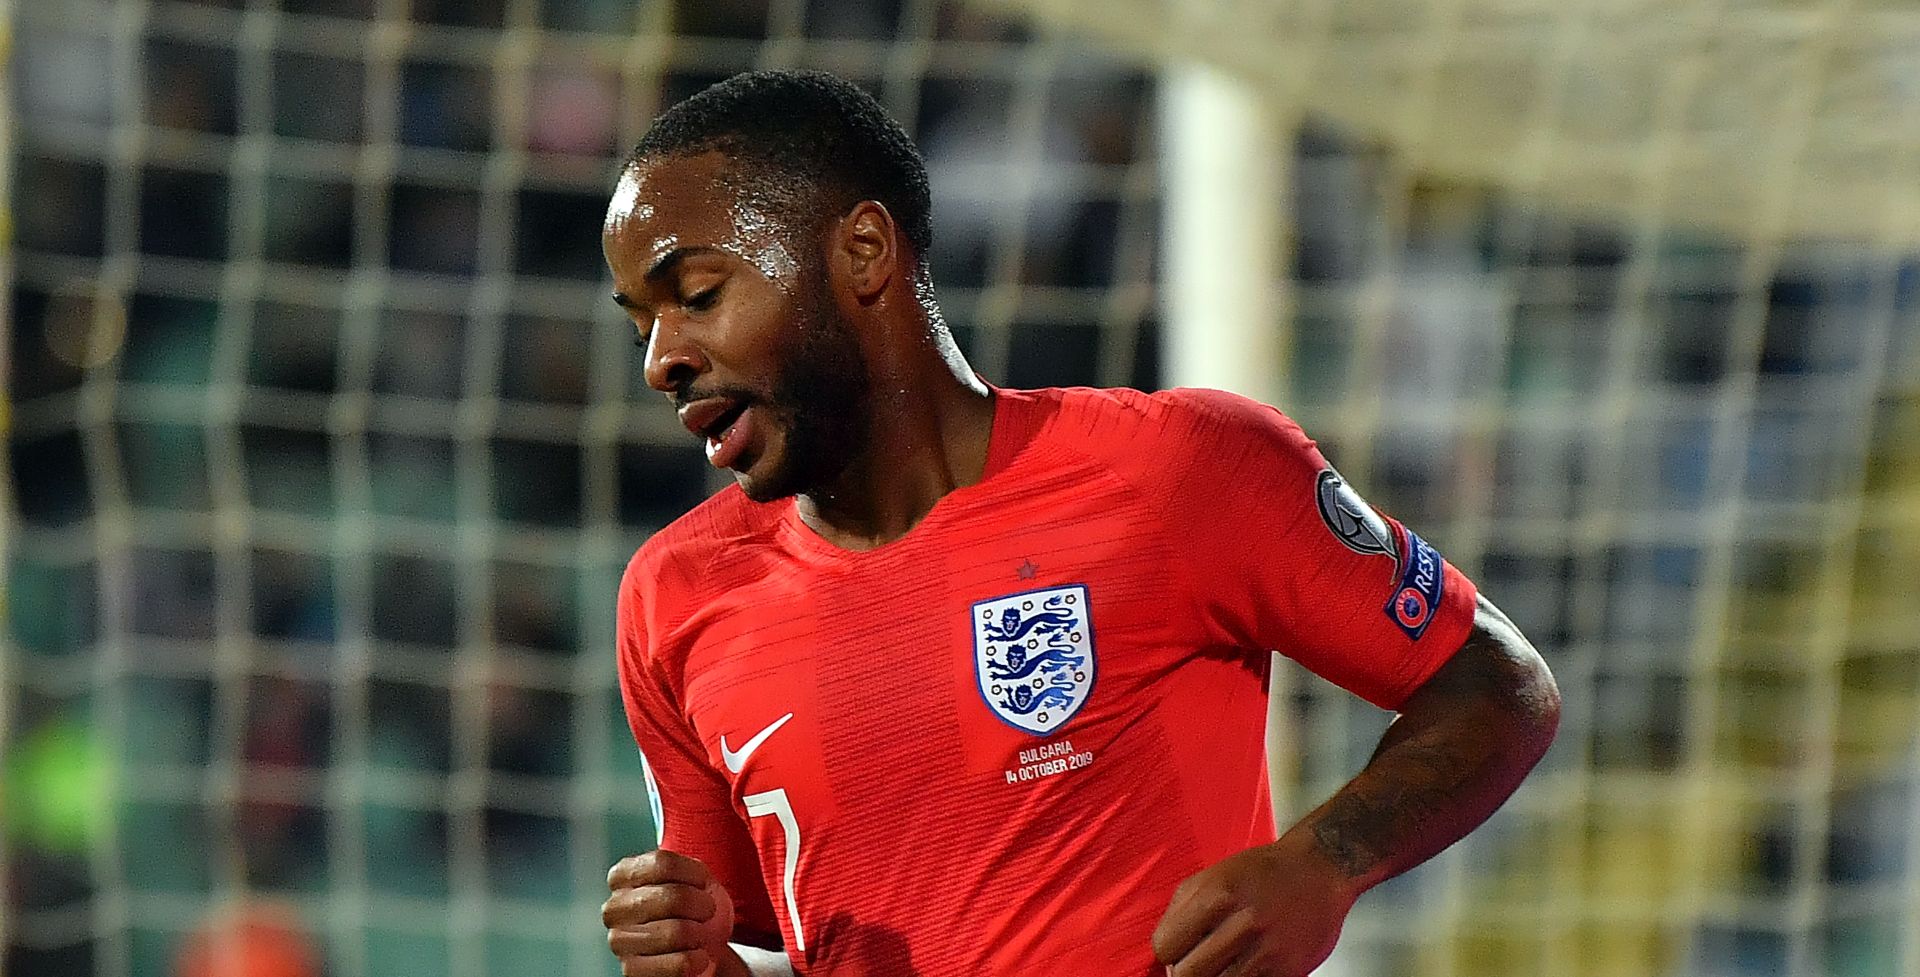 epa07920884 Raheem Sterling of England reacts after scoring during the UEFA EURO 2020 qualifying group A soccer match between Bulgaria and England, in Sofia, Bulgaria 14 October 2019.  EPA/GEORGI LICOVSKI